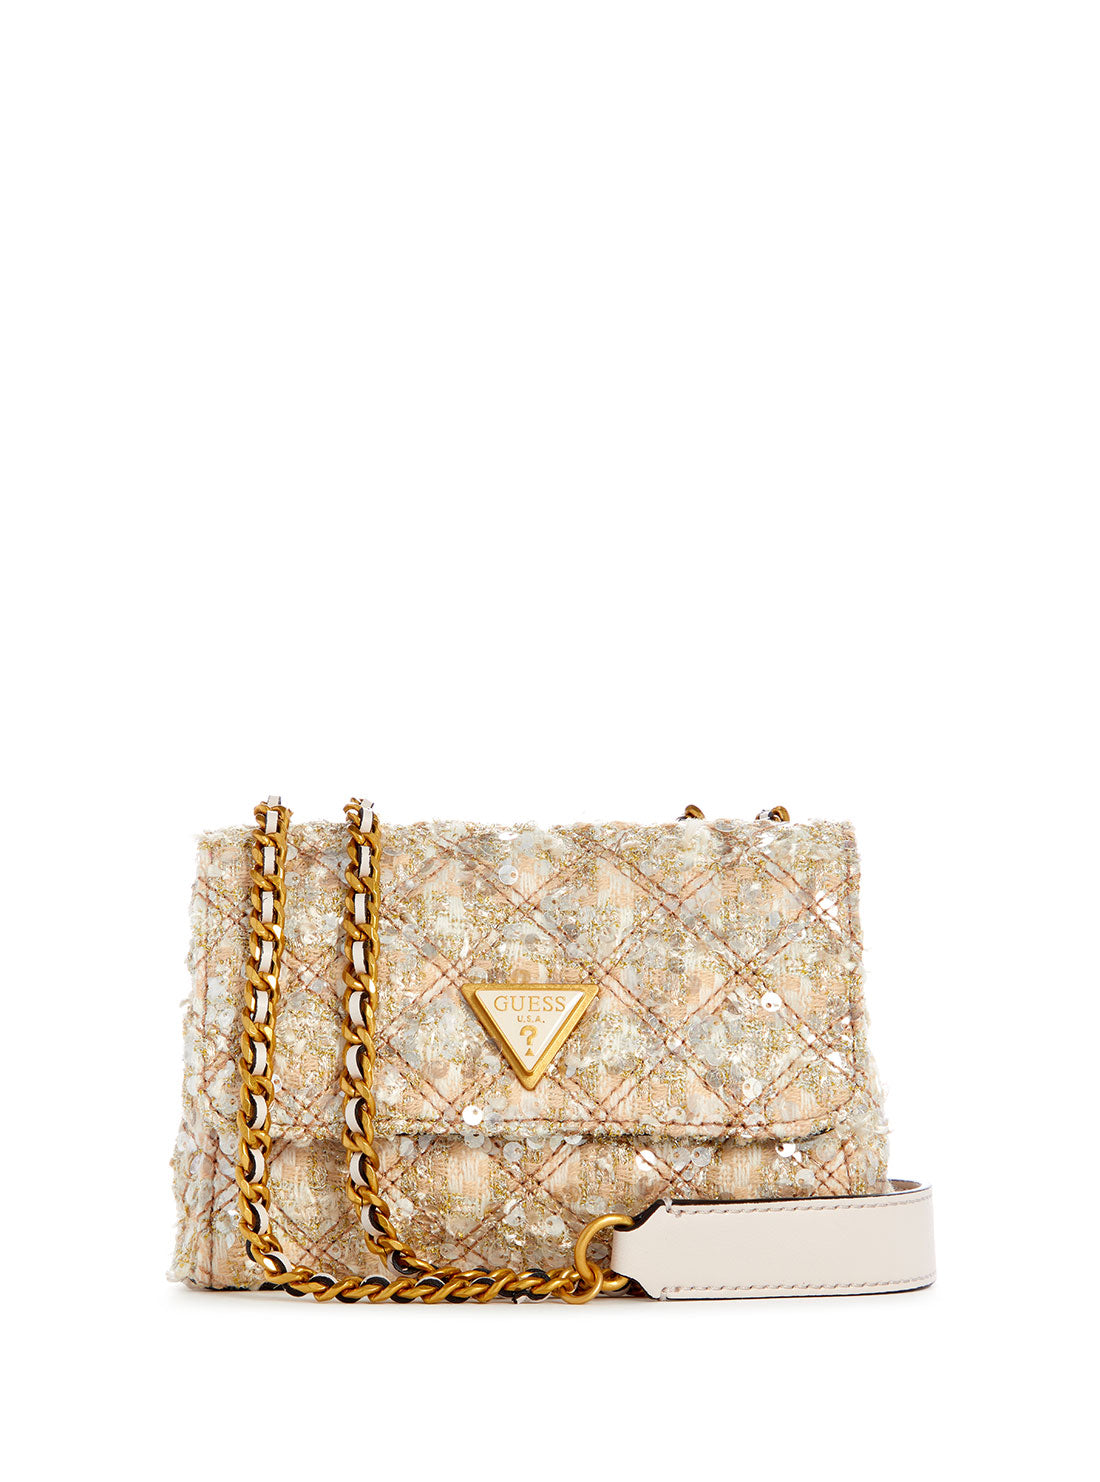 GUESS Gold Giully Mini Crossbody Bag front view